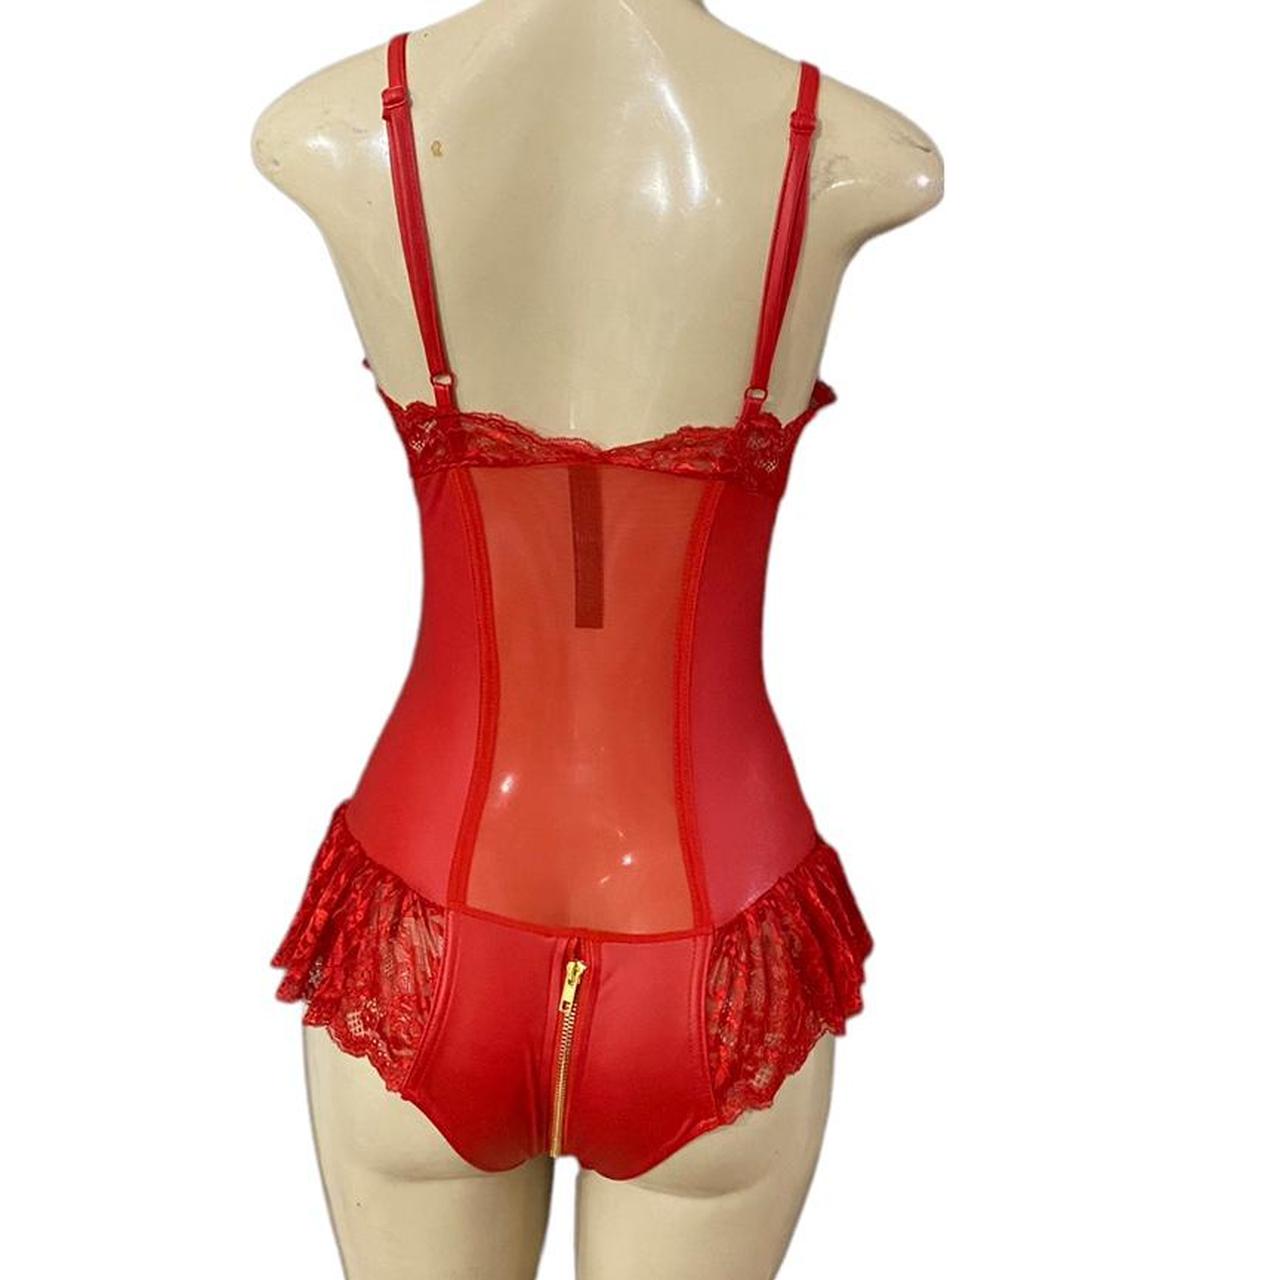 Product Image 3 - Red lingerie bodysuit 
Never worn